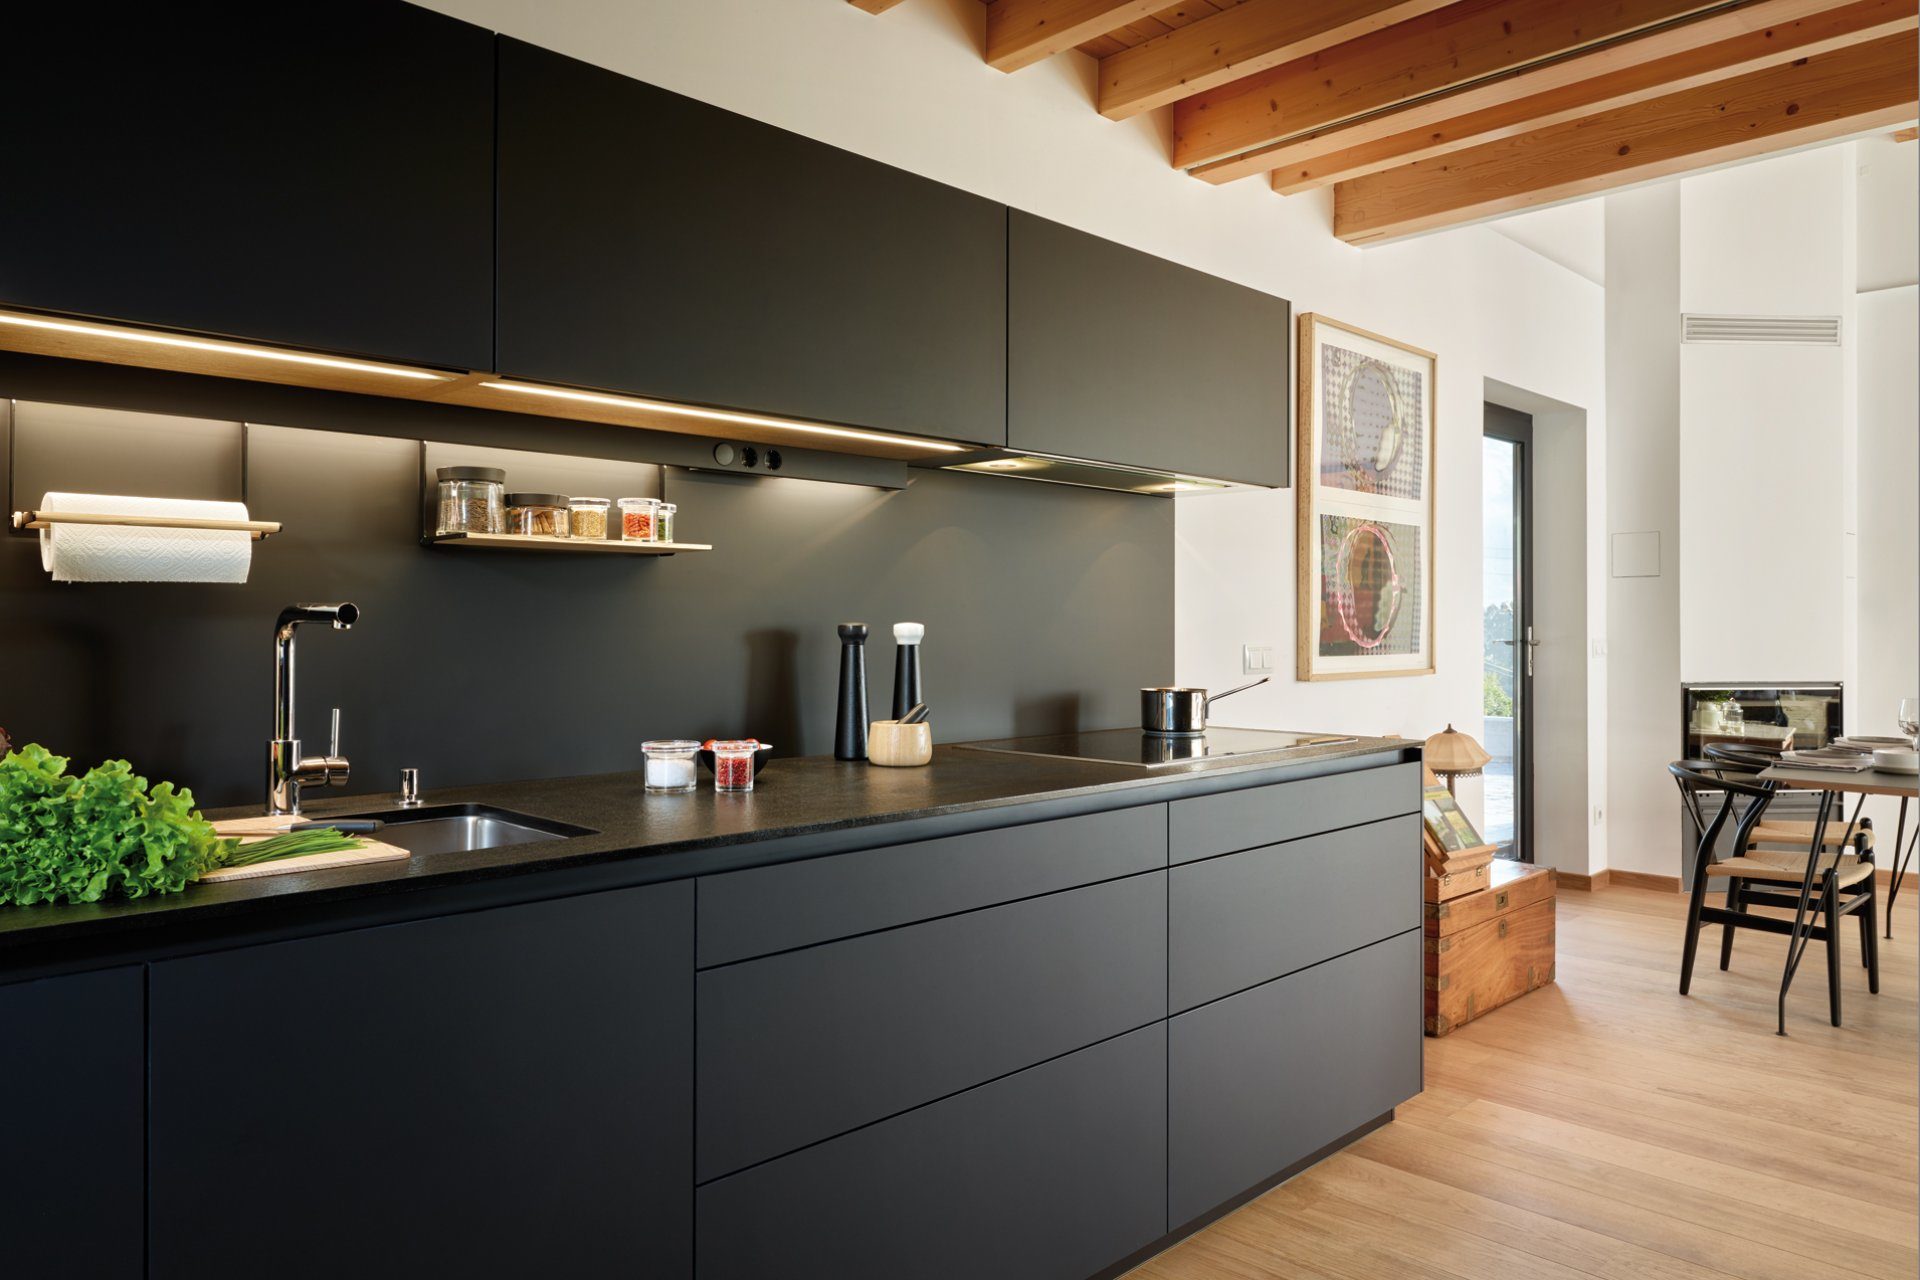 Black kitchen with clean lines and smooth fronts